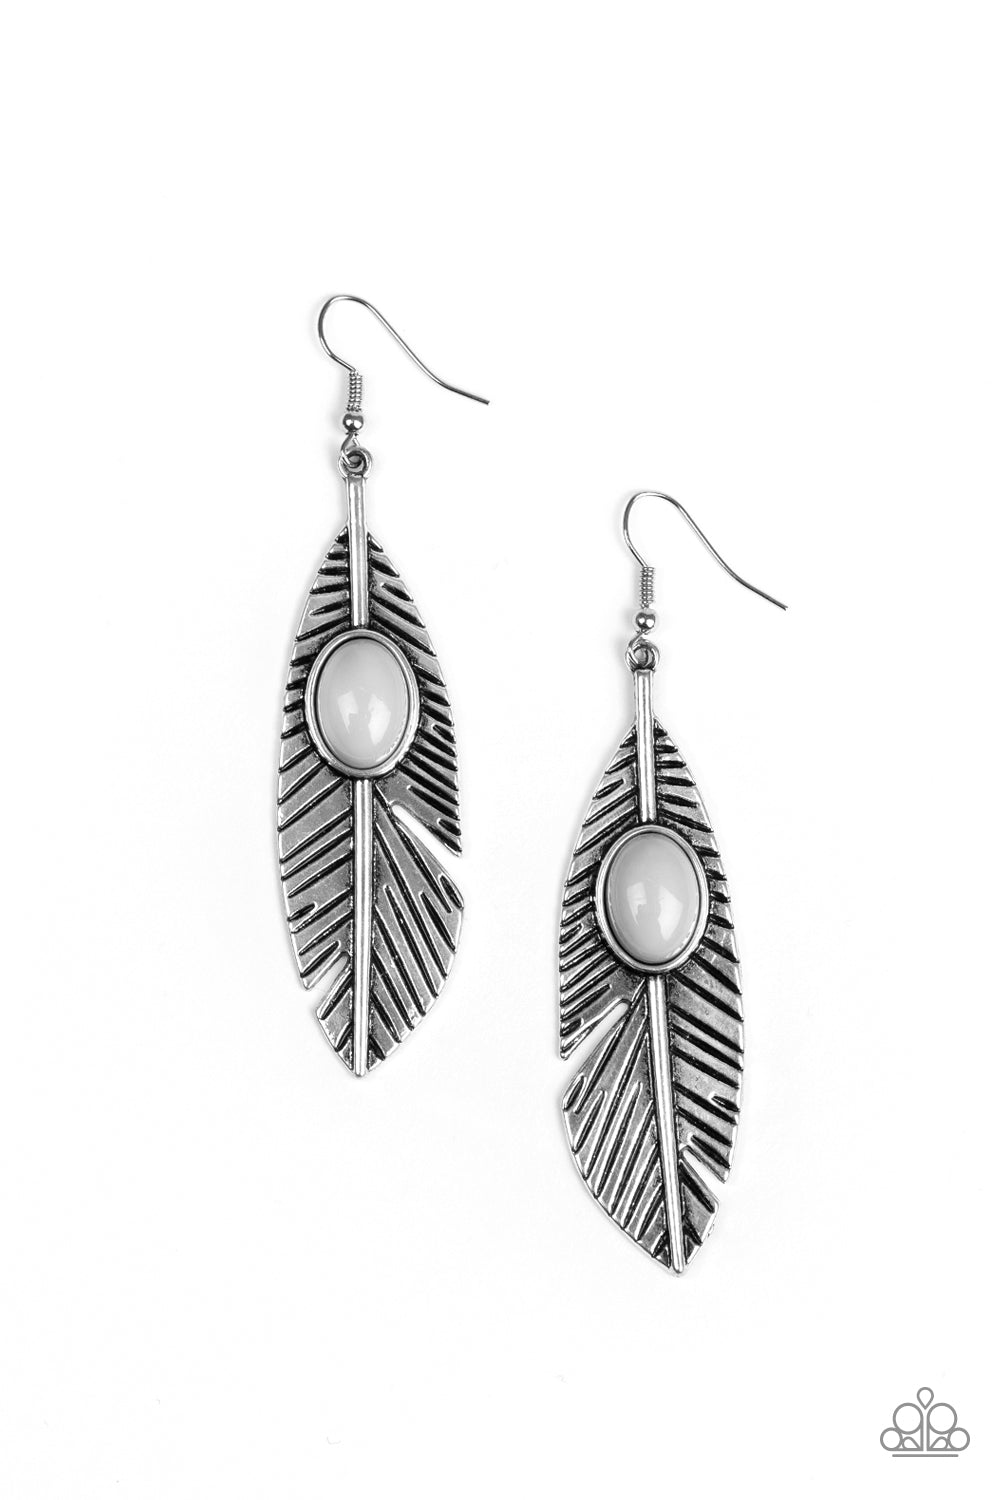 Paparazzi earring - Quill Thrill - Silver